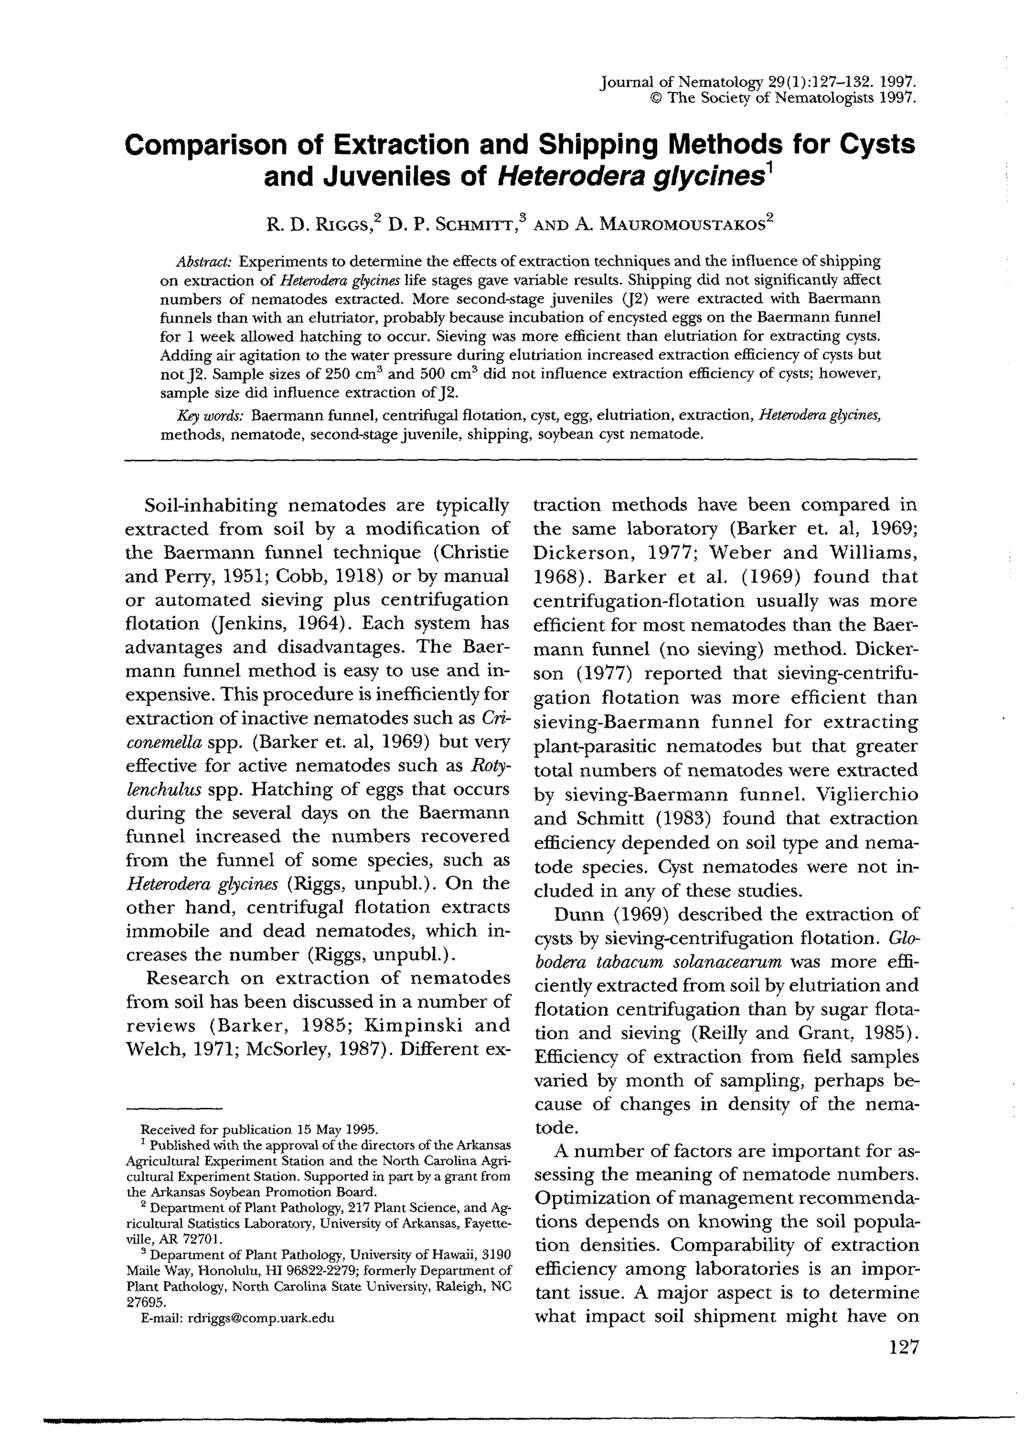 Journal of Nematology 29(1):127-132. 1997. The Society of Nematologists 1997. Comparison of and Shipping Methods for Cysts and Juveniles of Heterodera glycines 1 R. D. RIGGS, 2 D. P. SCHMITT, 3 AND A.